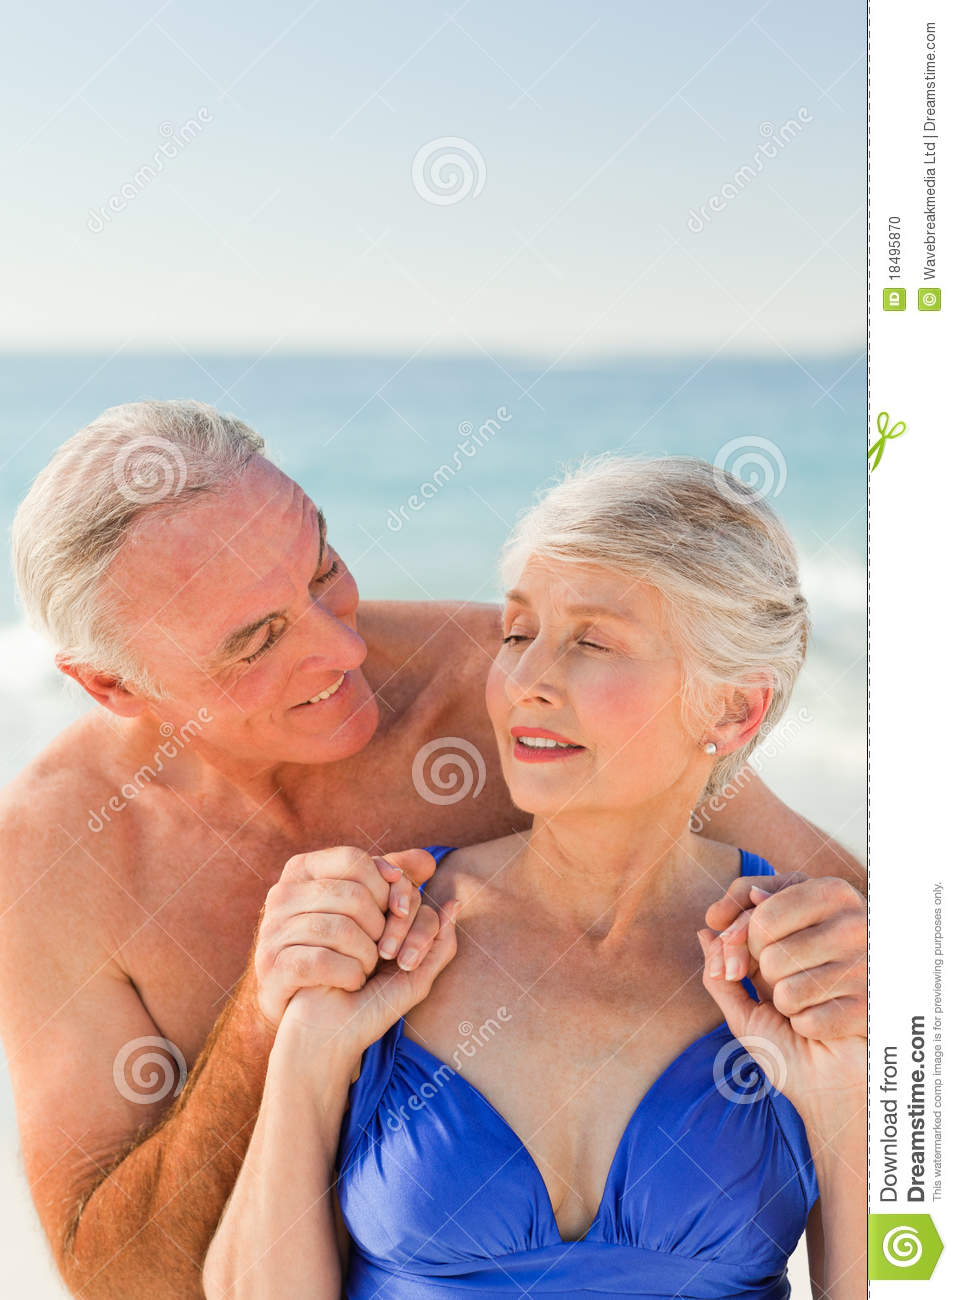 Man Hugging His Wife At The Beach Stock Photo   Image  18495870